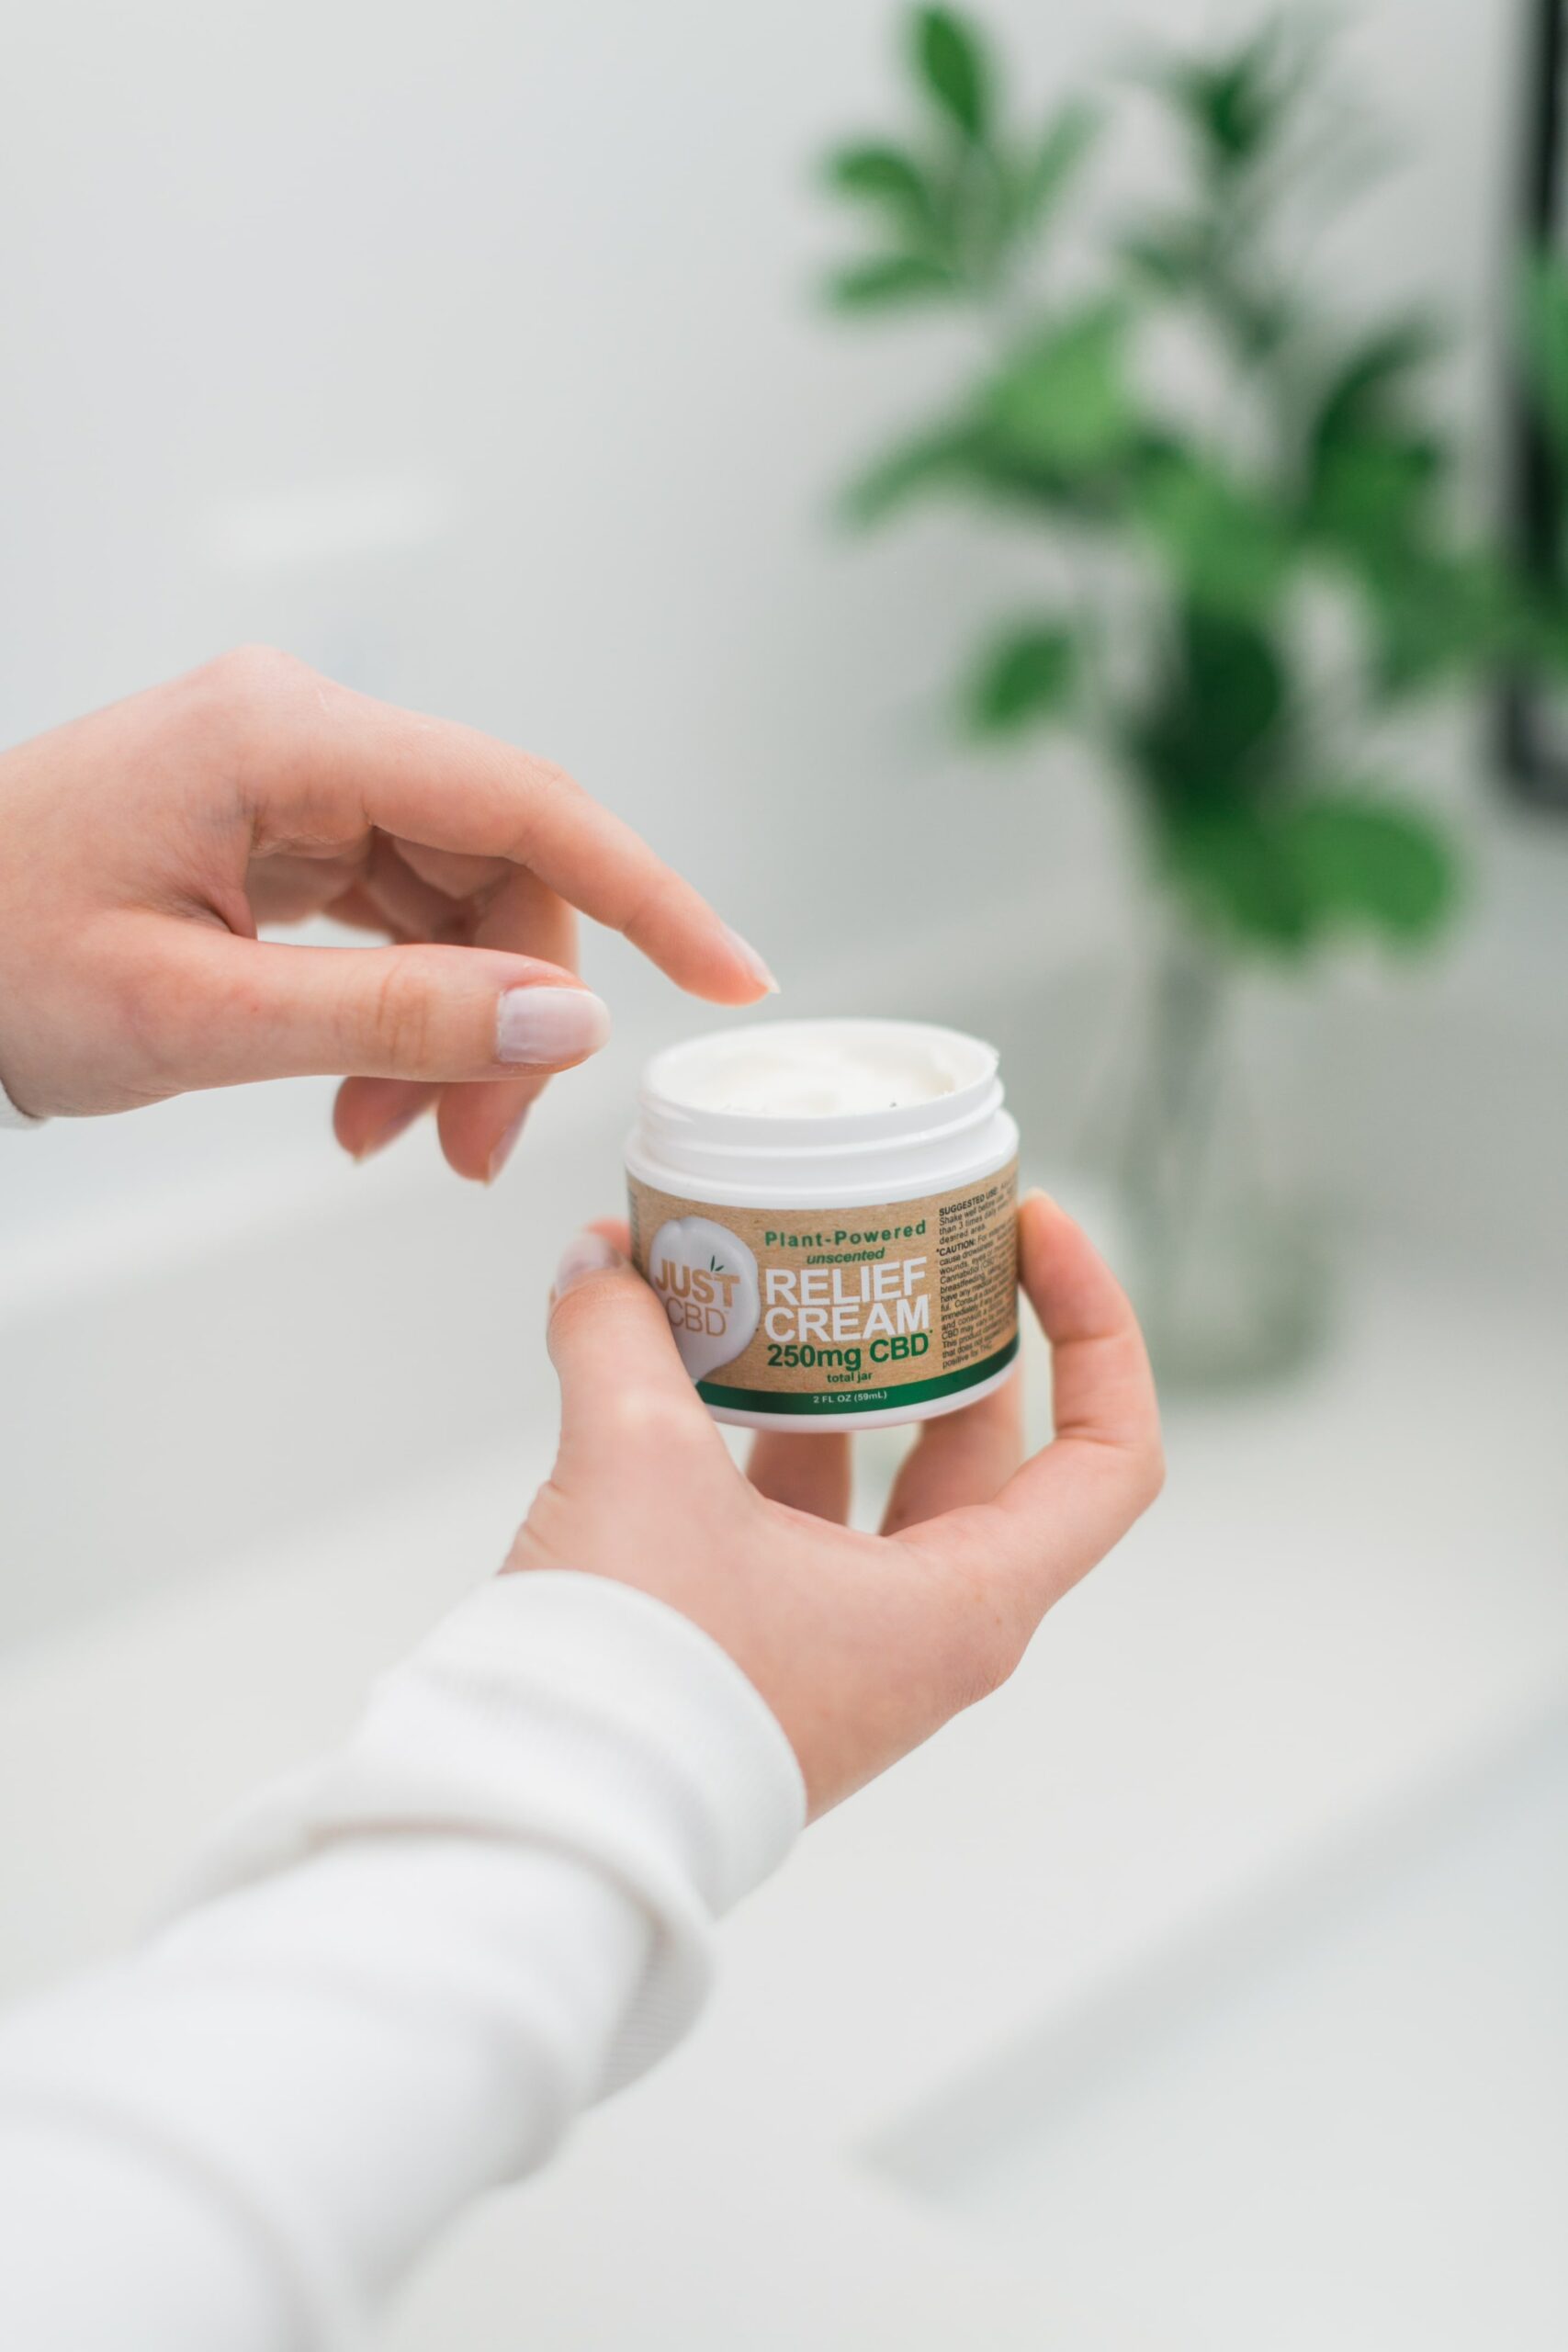 5 SKIN PROBLEMS THAT CAN BE HELPED WITH CBD CREAM